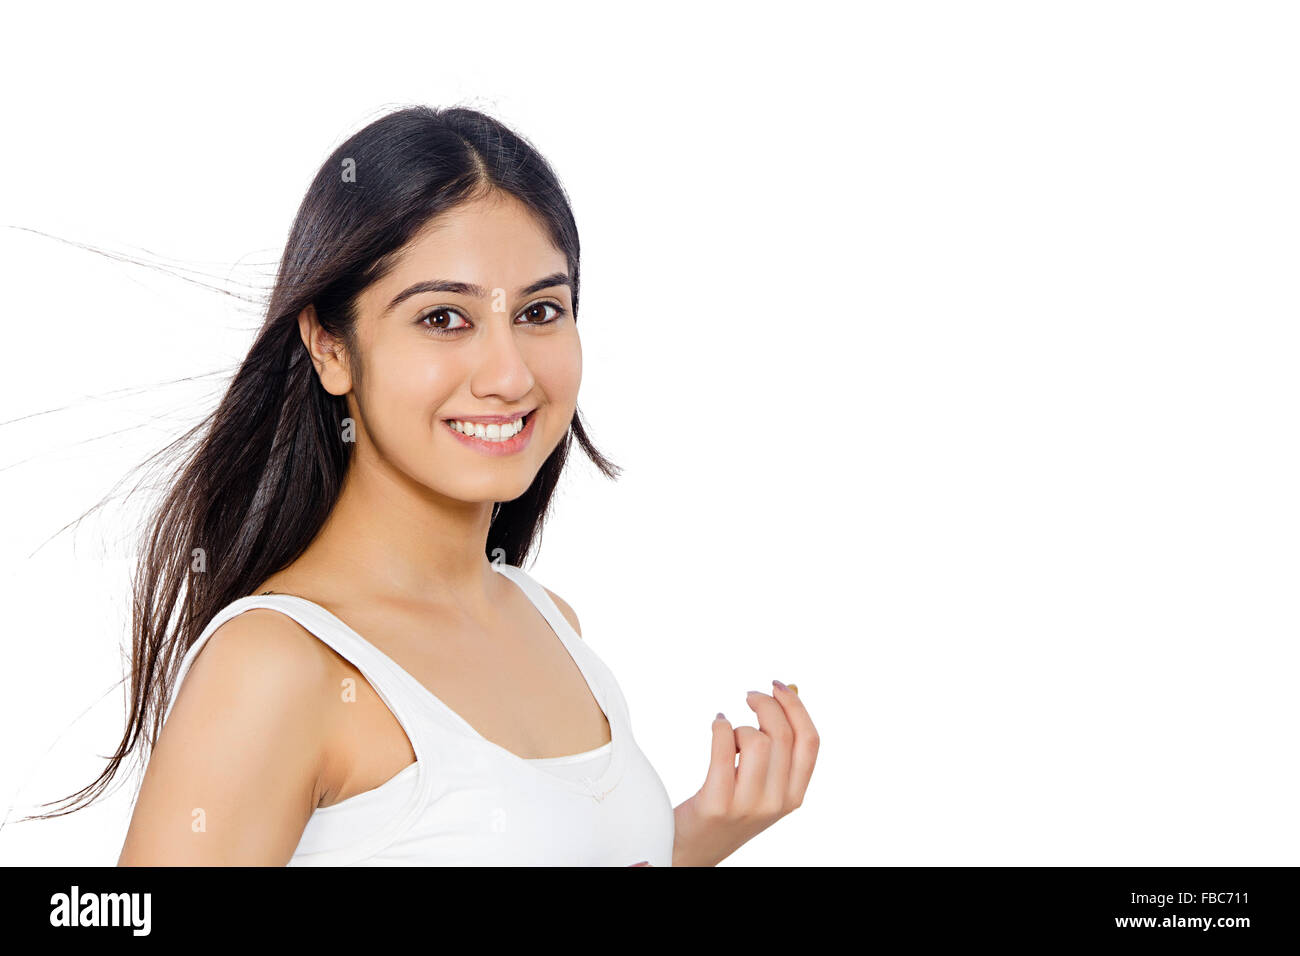 1 indian Young Woman standing Stock Photo